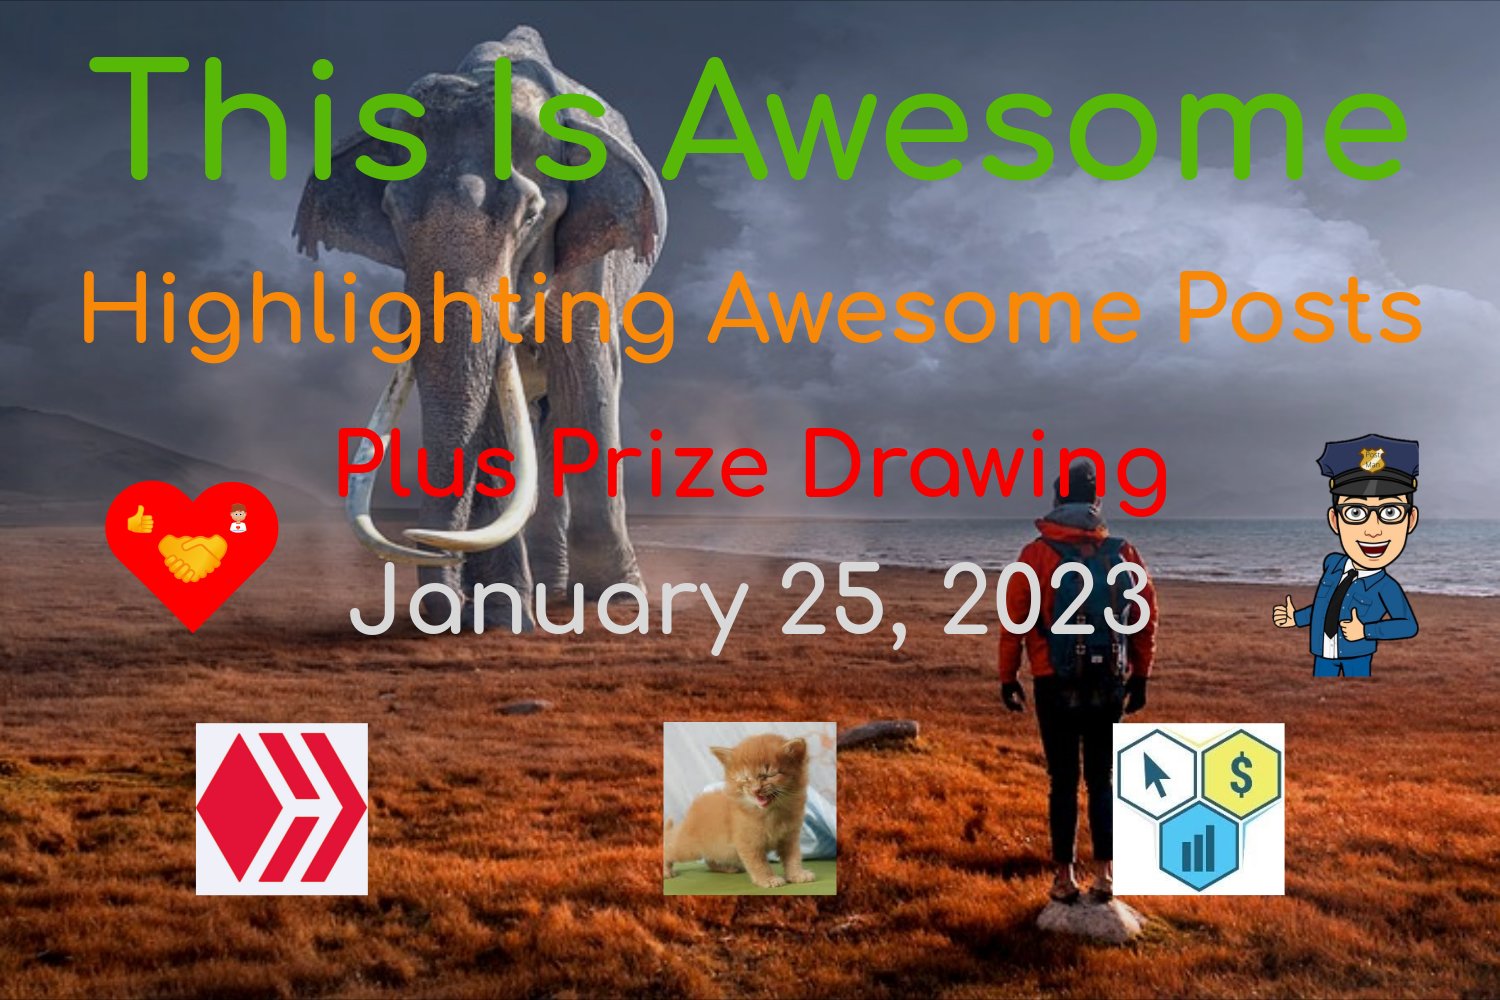 @thisisawesome/this-is-awesome-highlighting-awesome-posts-plus-prize-drawing-january-25-2023